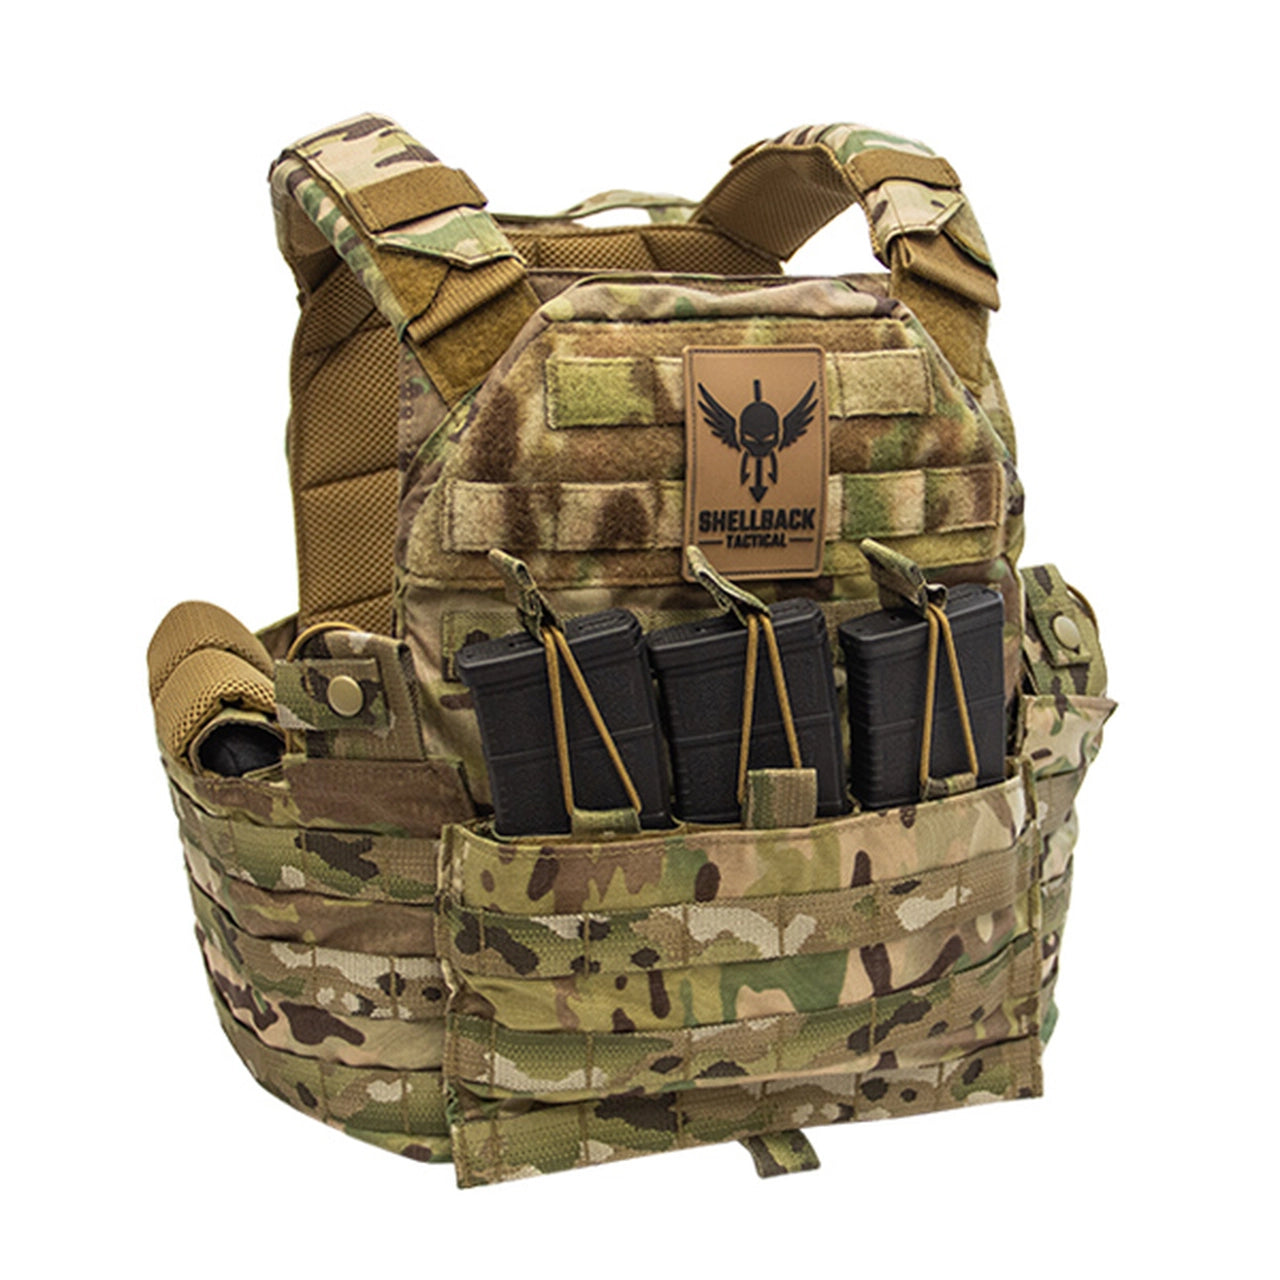 A combat ready plate carrier, the Shellback Tactical SF Plate Carrier by Shellback Tactical is a modular and low profile gear that comes equipped with multiple magazines for efficient ammunition storage.